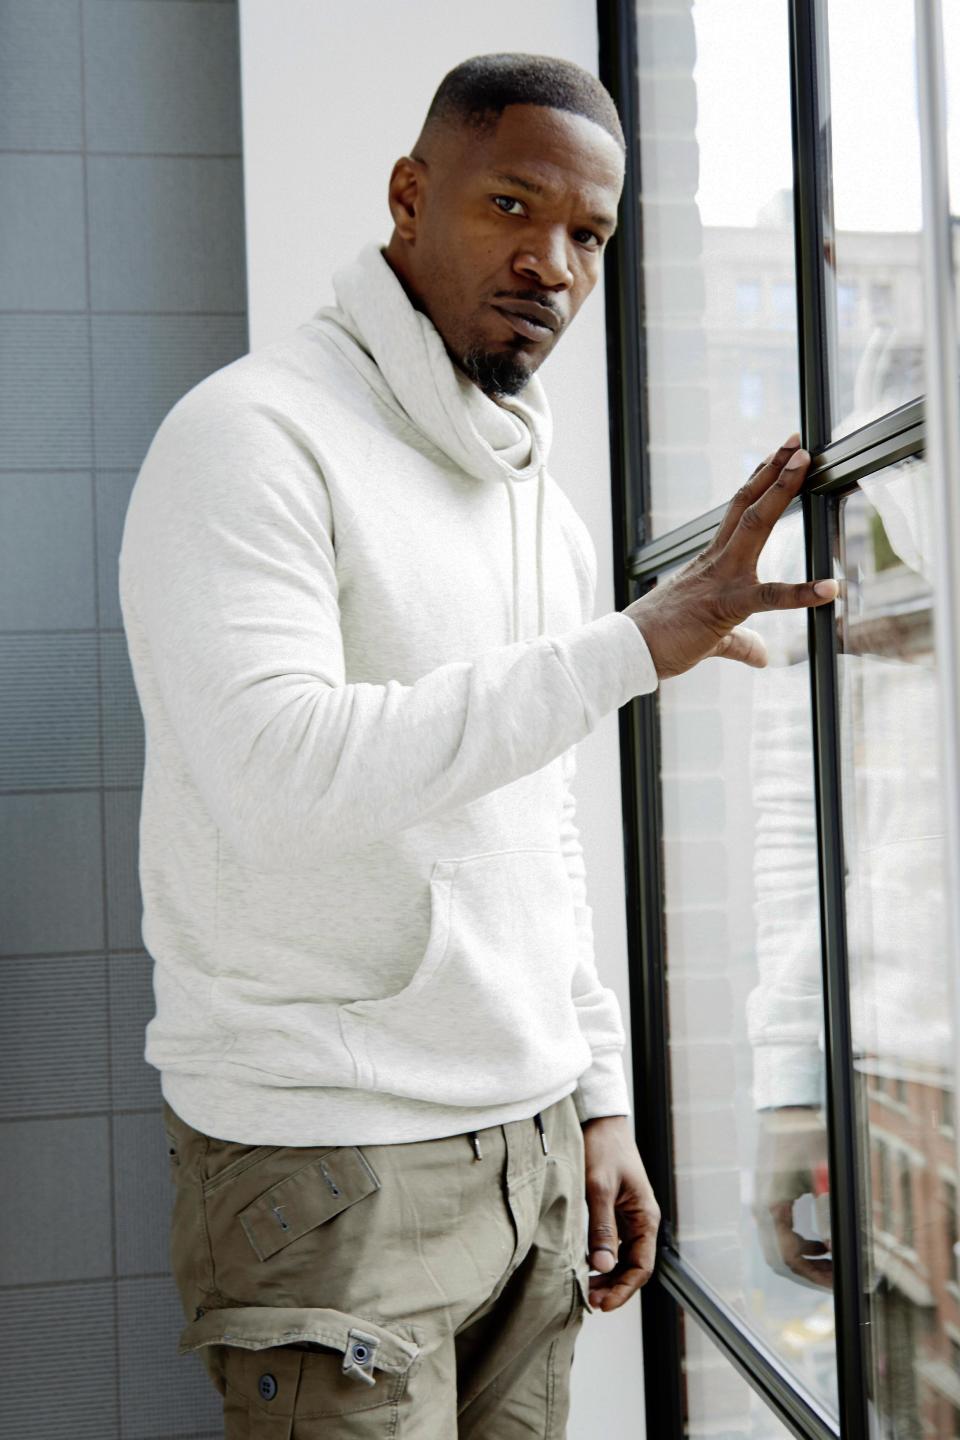 Actor Jamie Foxx poses for a portrait at the Crosby Street Hotel, in promotion of his upcoming role in "The Amazing Spider-Man 2," on Sunday, April 27, 2014 in New York. (Photo by Dan Hallman/Invision/AP)